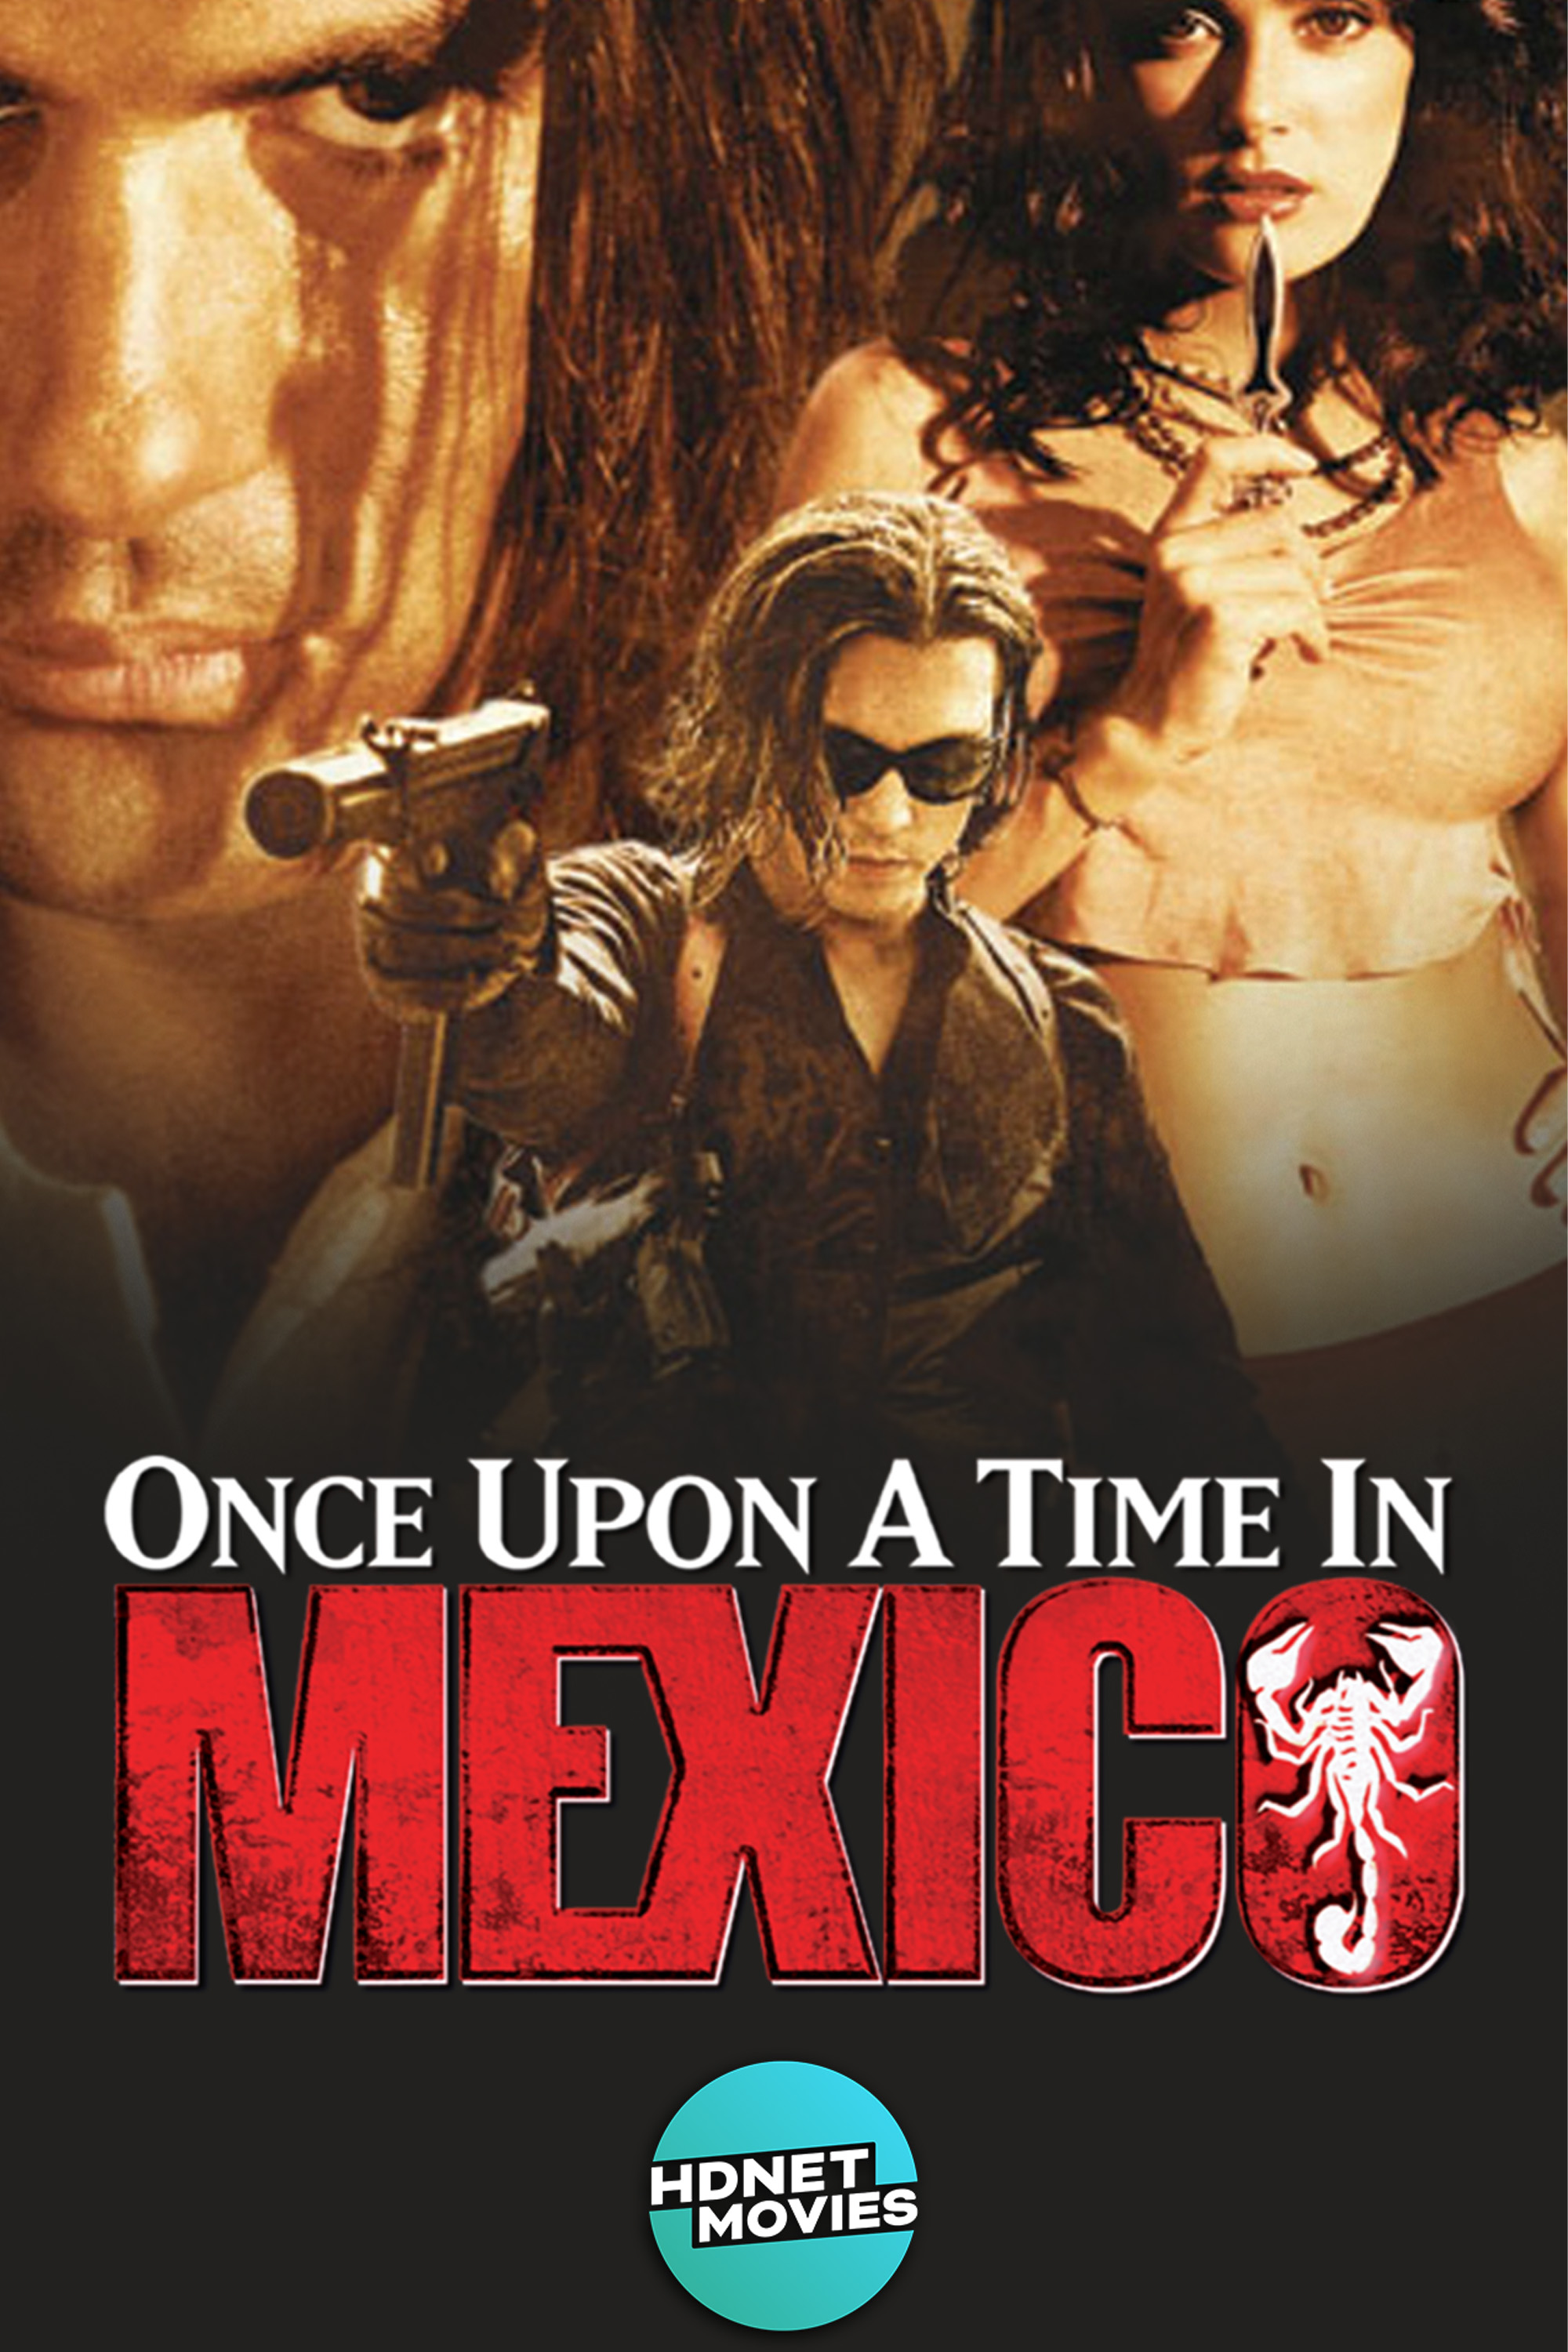 Once Upon A Time in Mexico